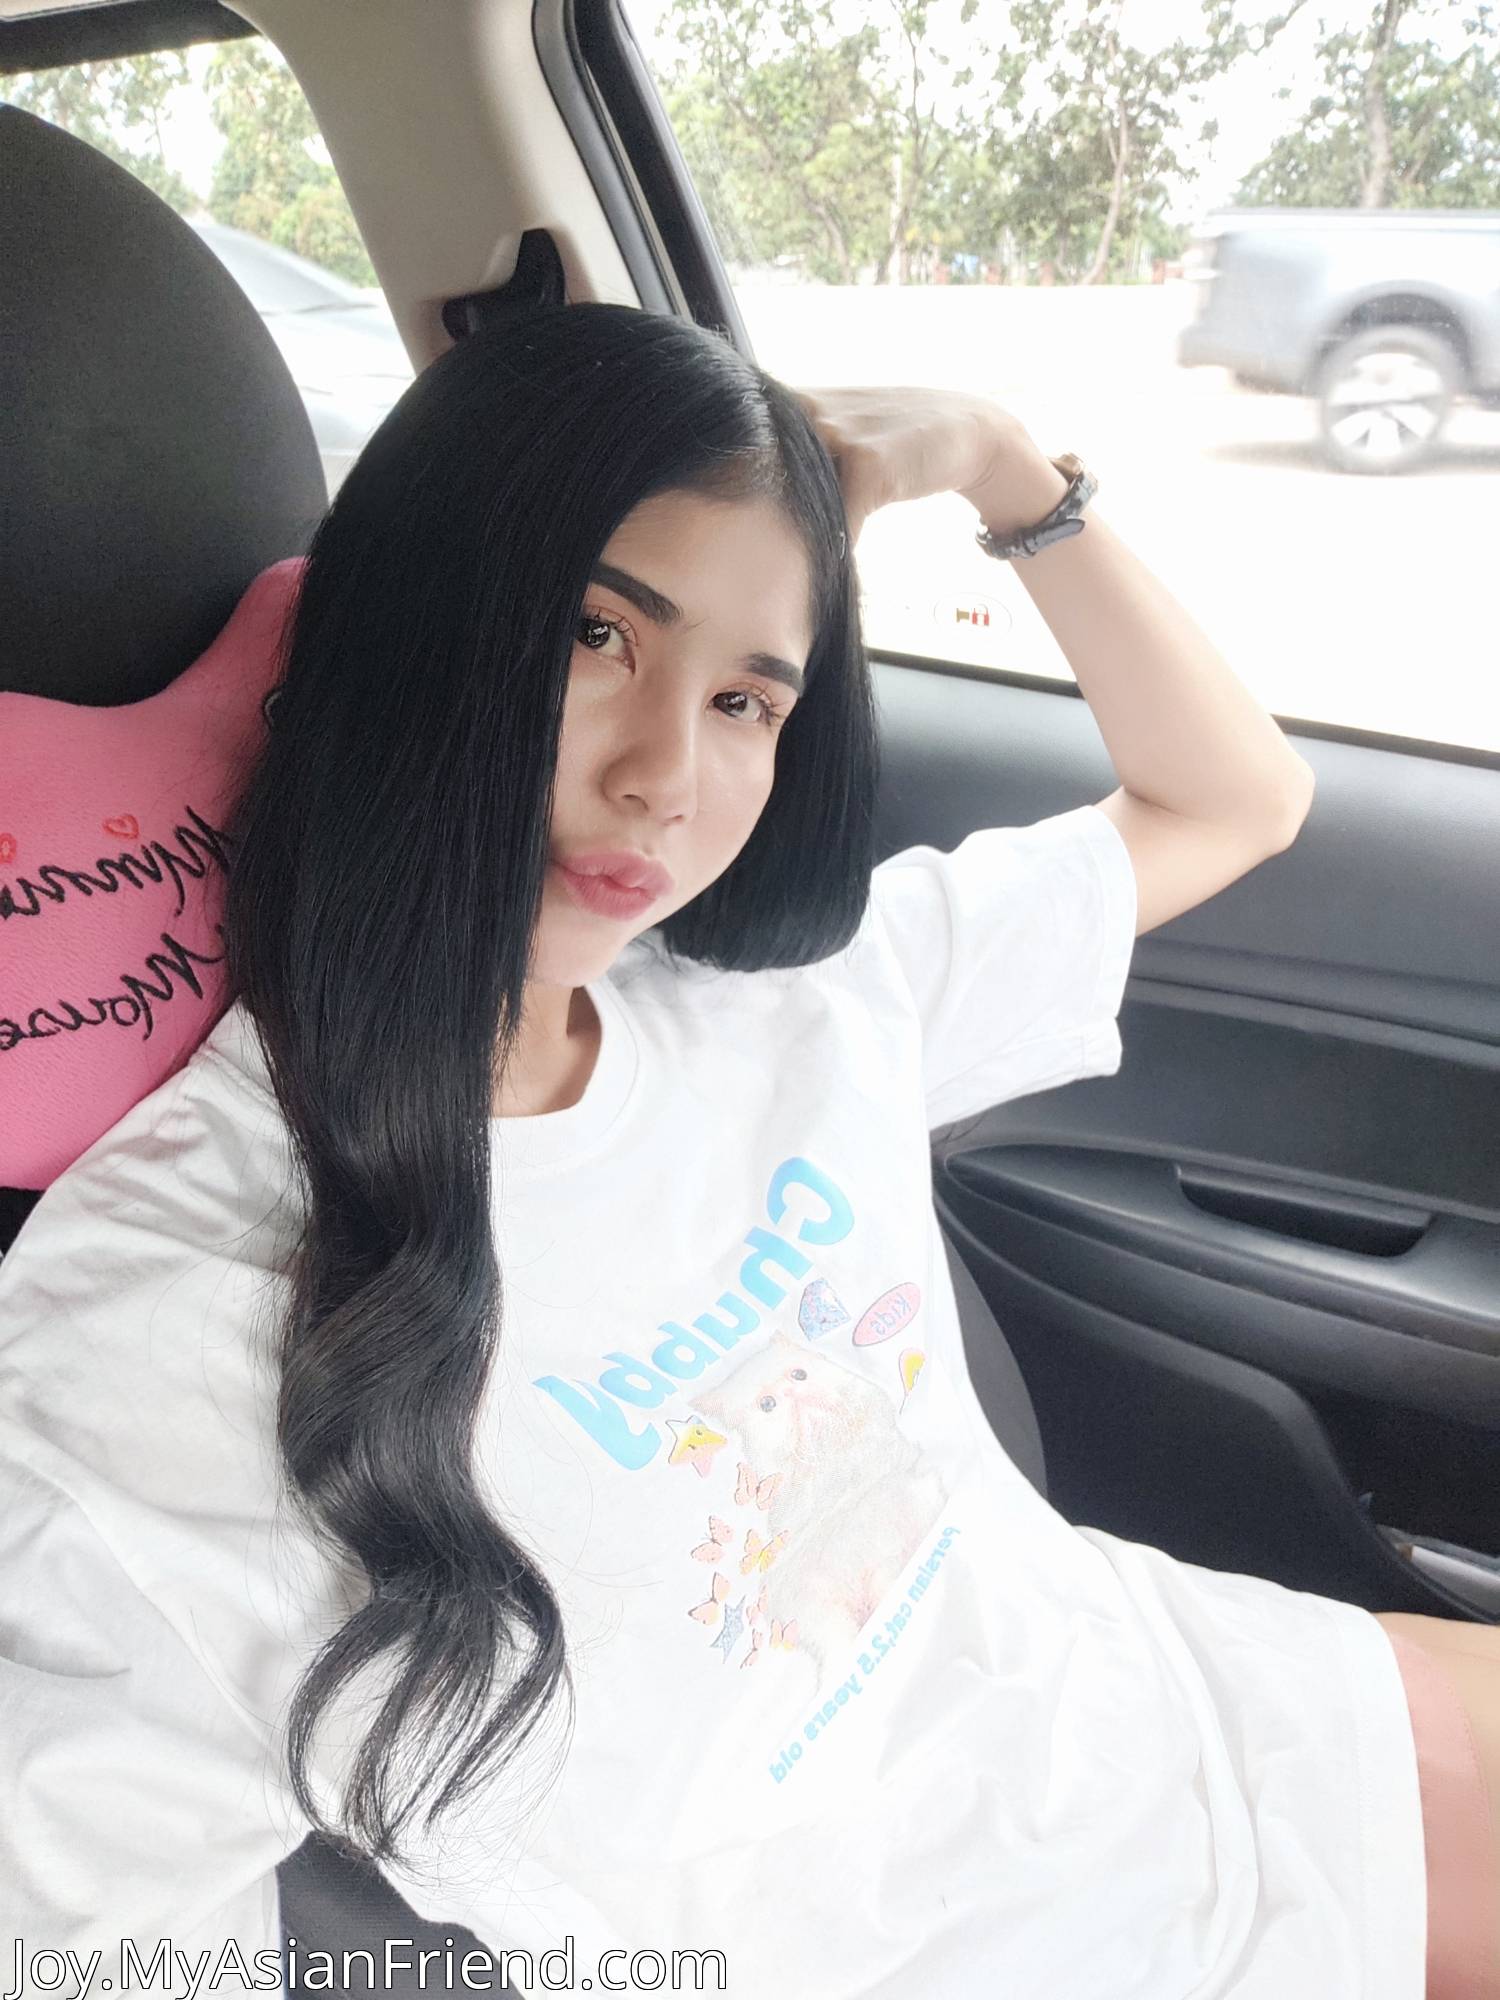 Joy's personal blog photo 1 added Saturday the 24th of September 2022